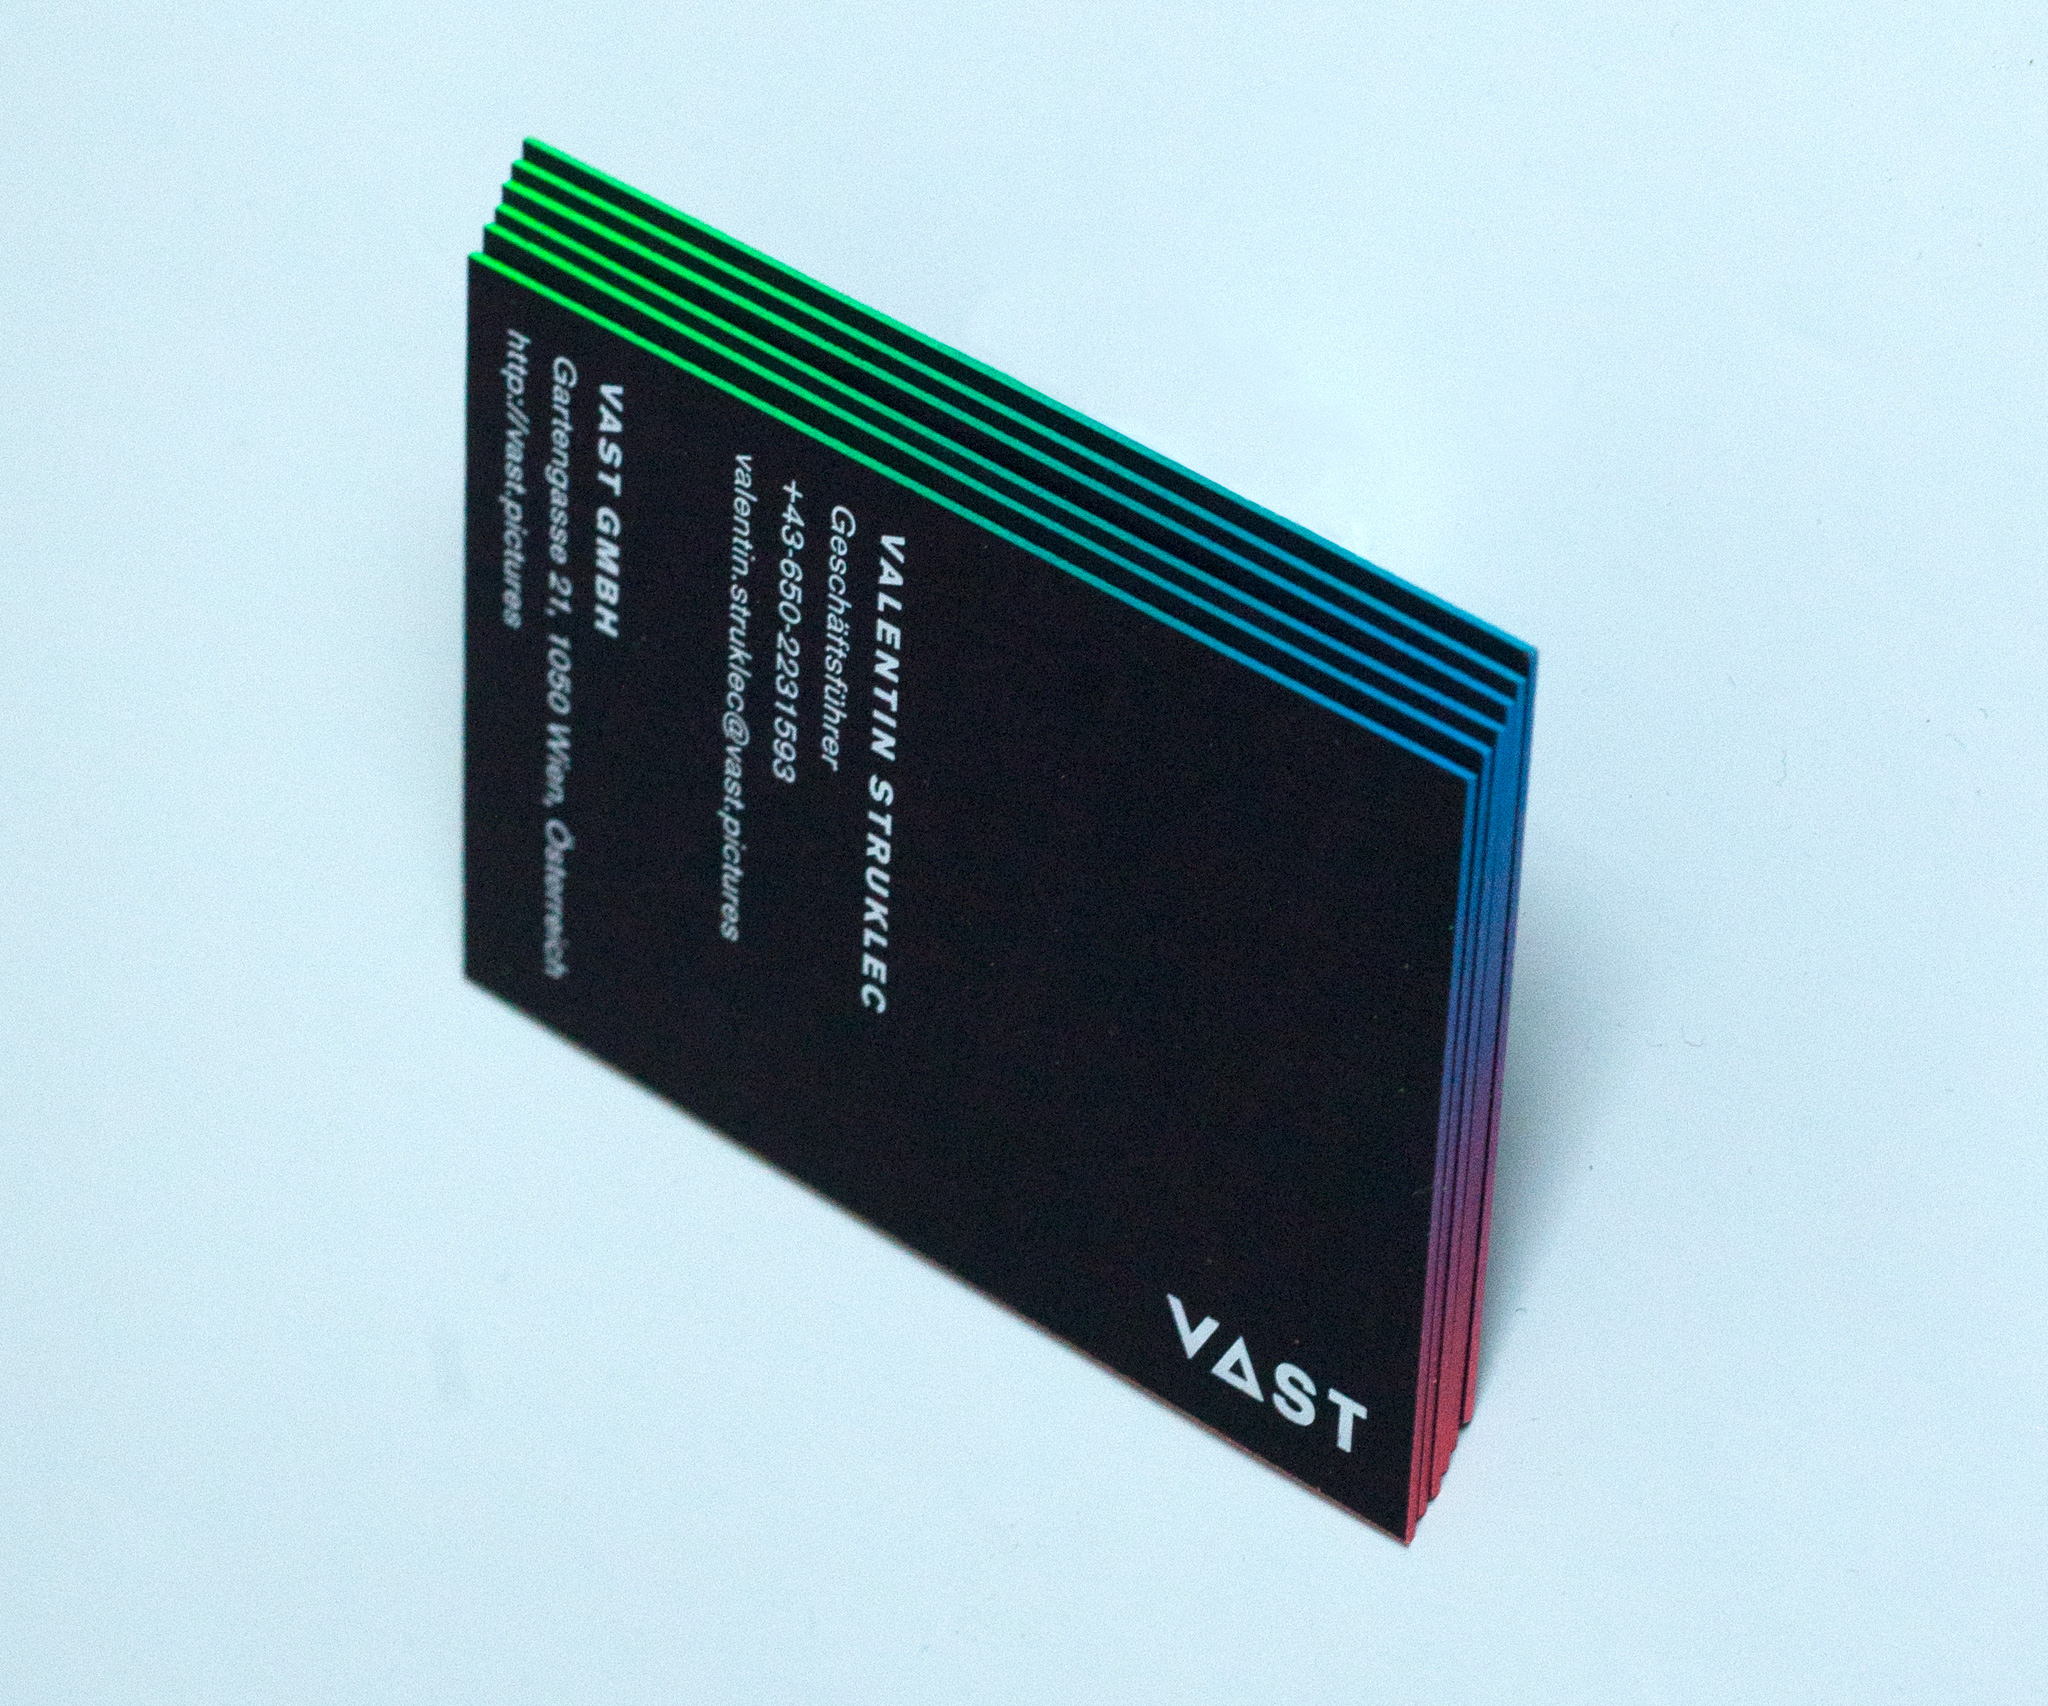 VAST business cards with colored egdes with a gradient